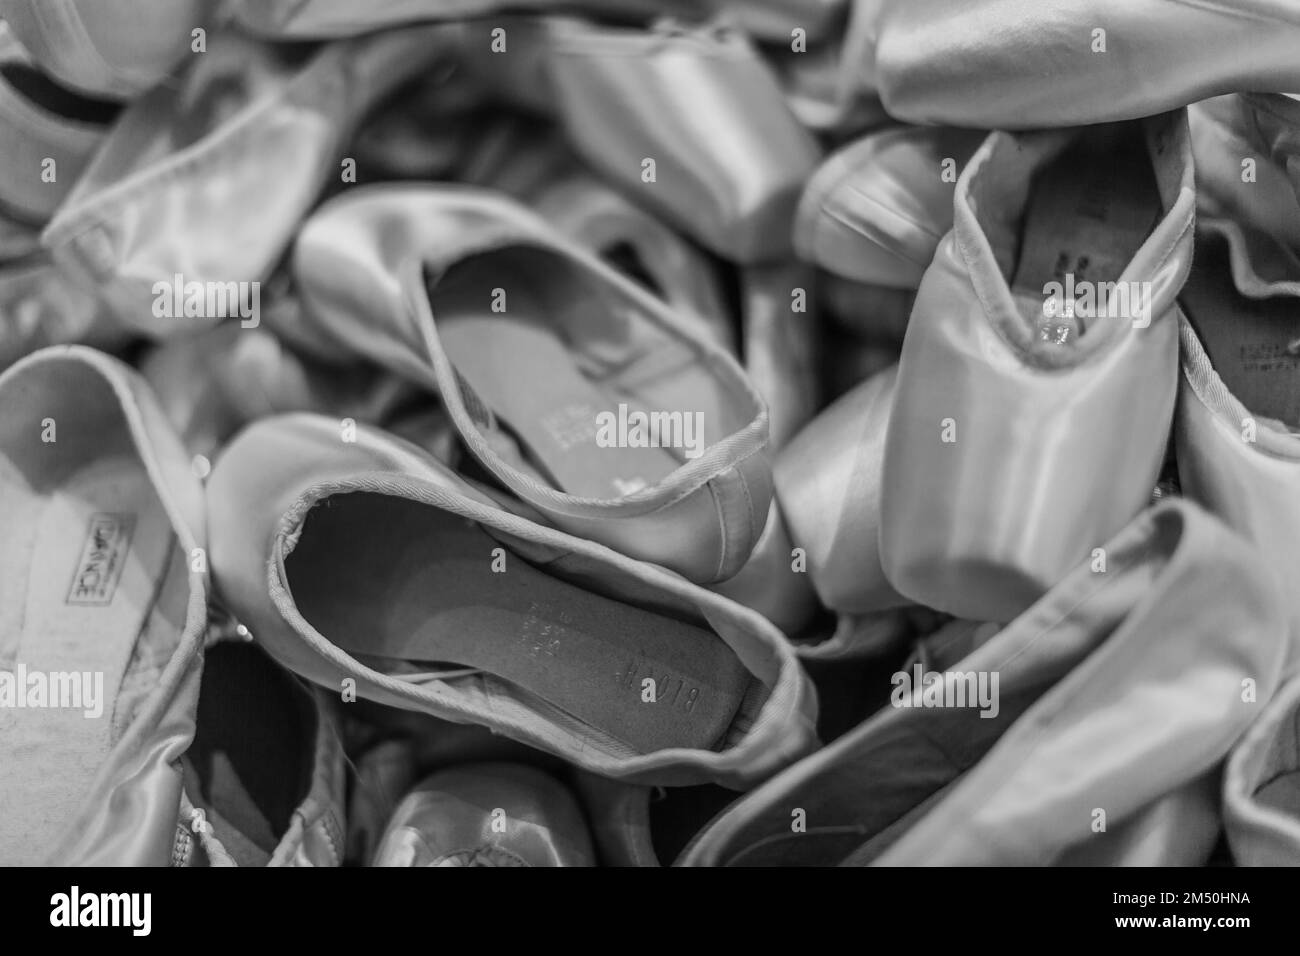 A black and white display of ballet shoes. Stock Photo